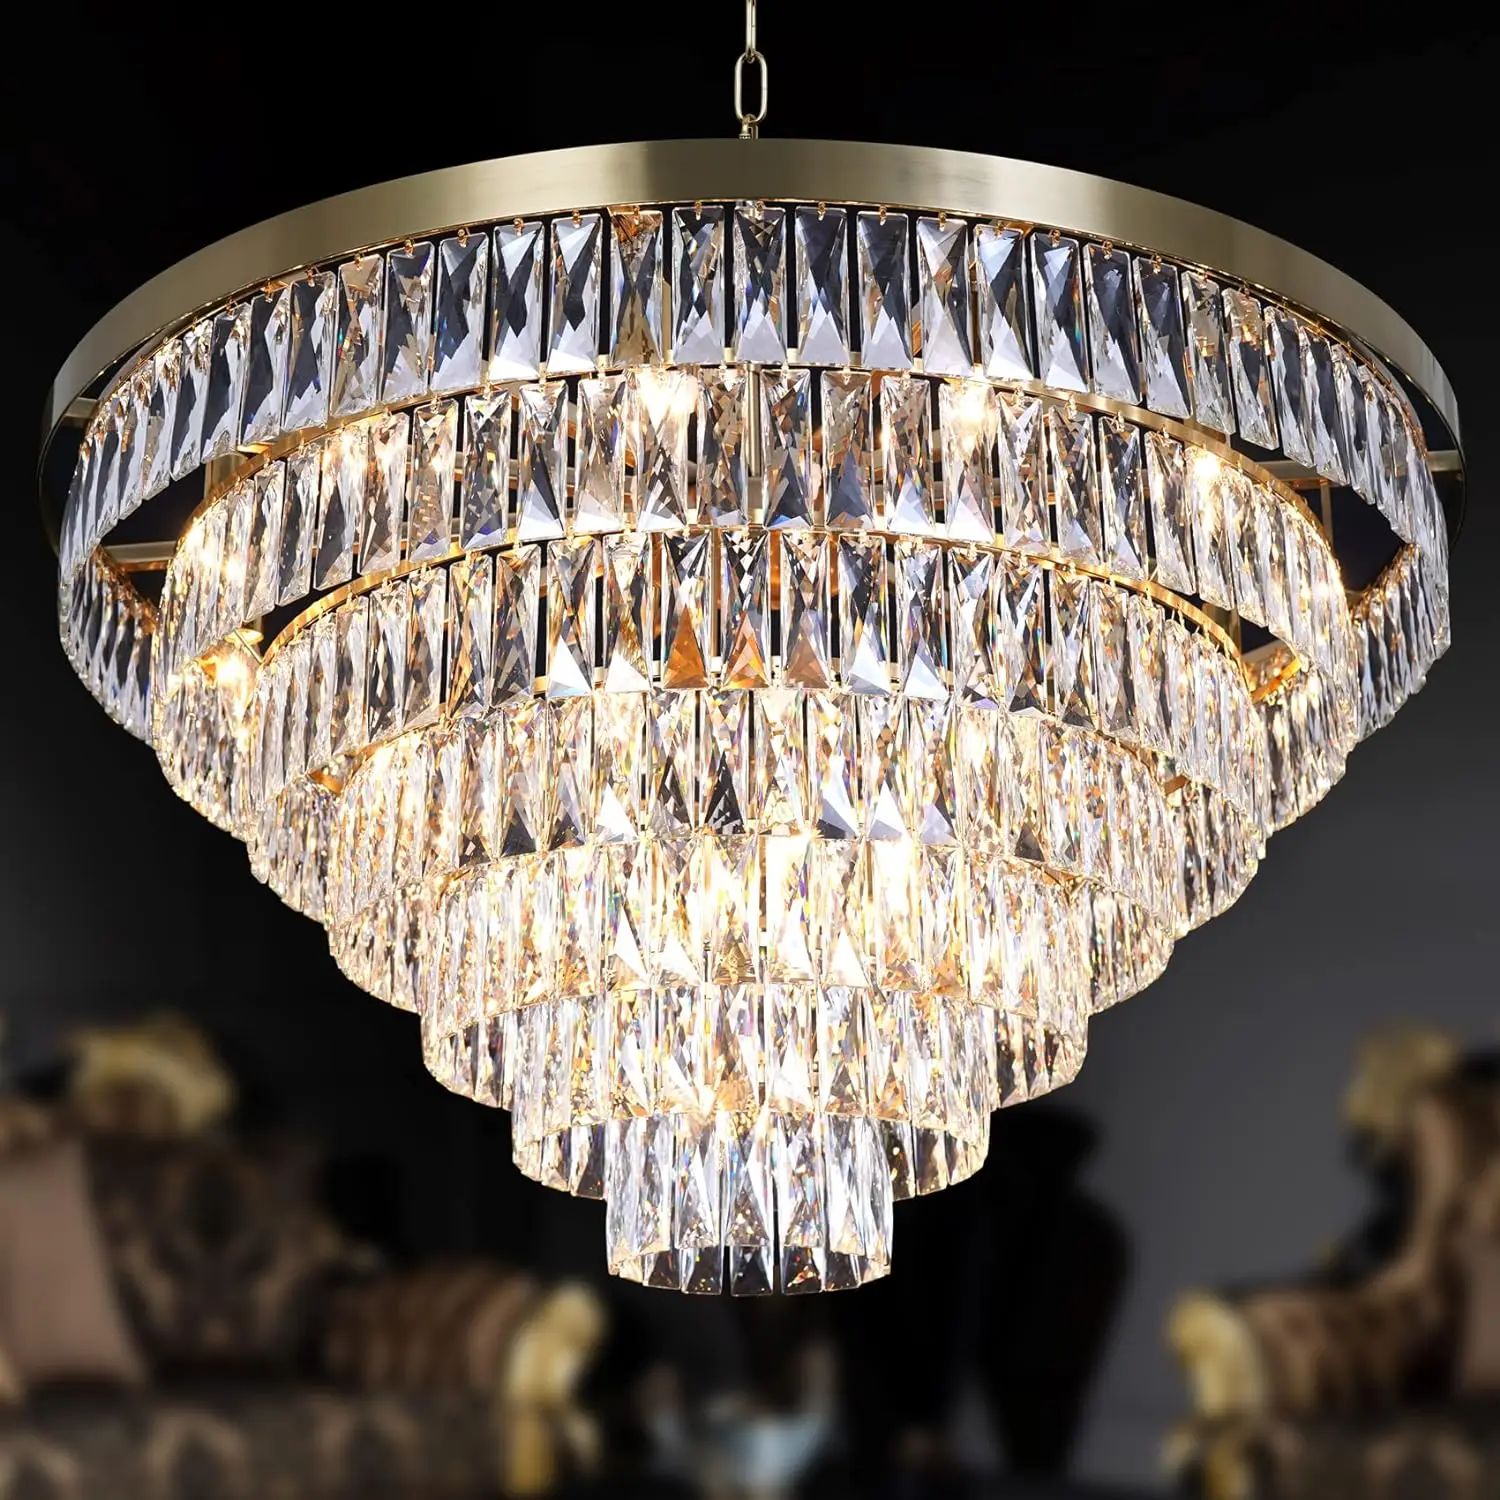 

Chandelier Lighting Brass Modern Pendant Ceiling Light Fixture Contemporary Island Chandeliers for Living Room Dining Room